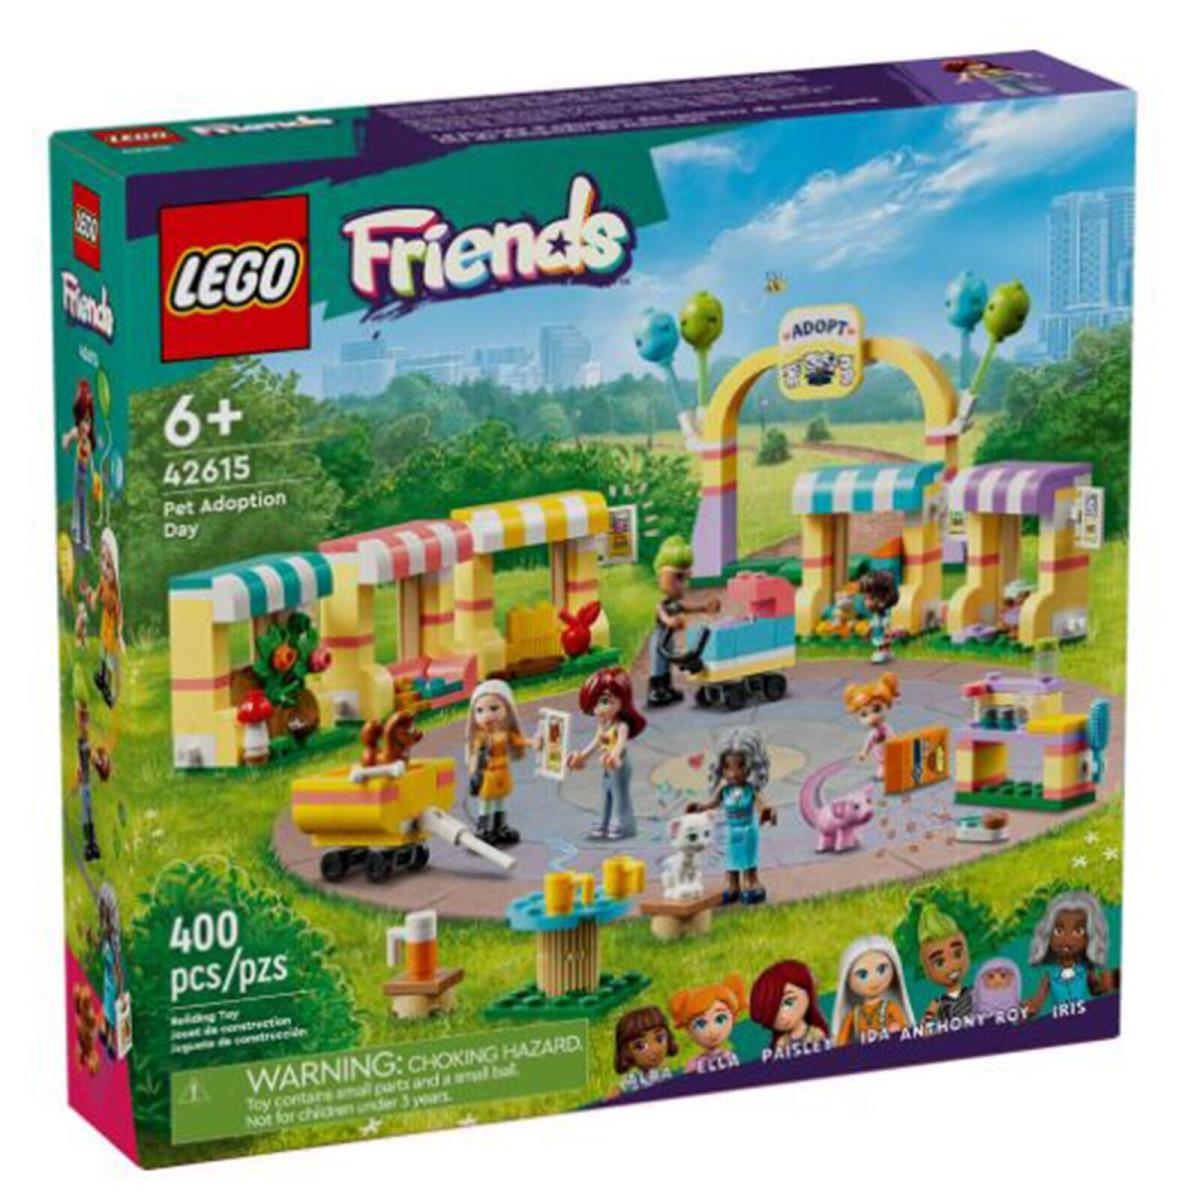 Lego Friends Pet Adoption Day Building Set 42615 IN Stock